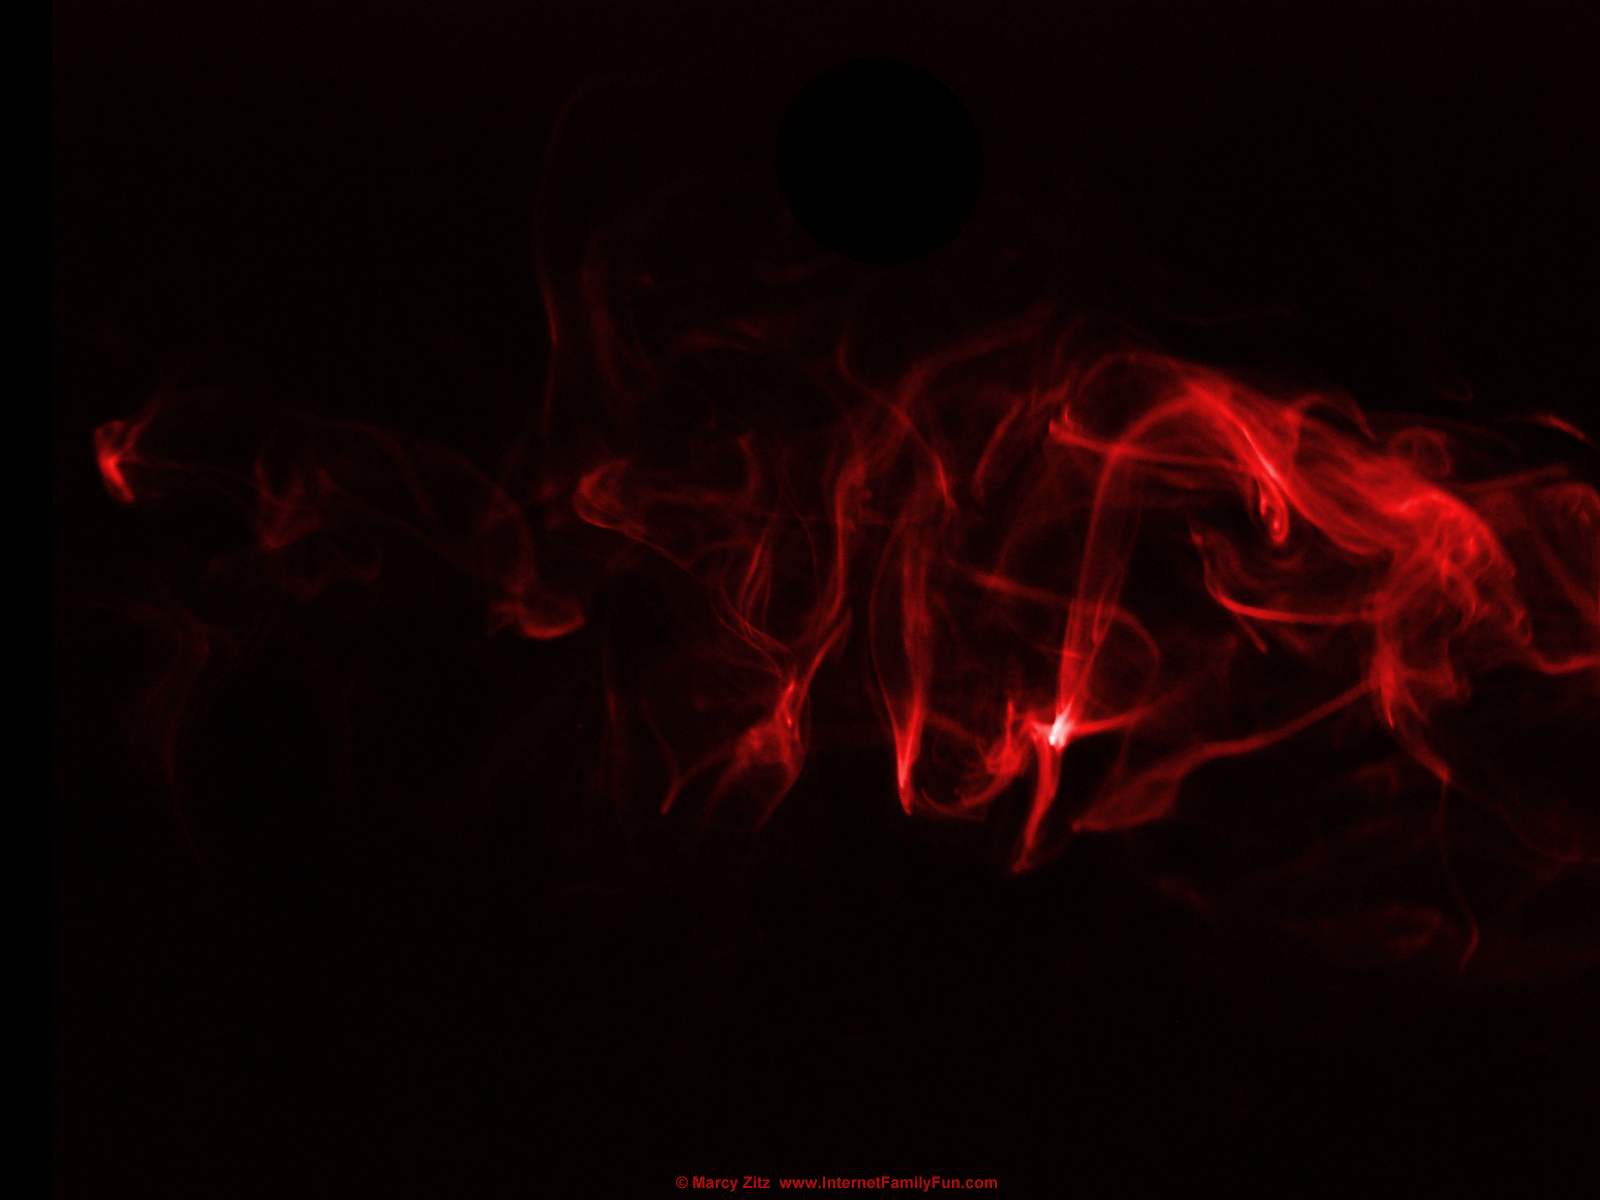 Abstract Smoke in Red 2 Wallpaper Background for Desktop